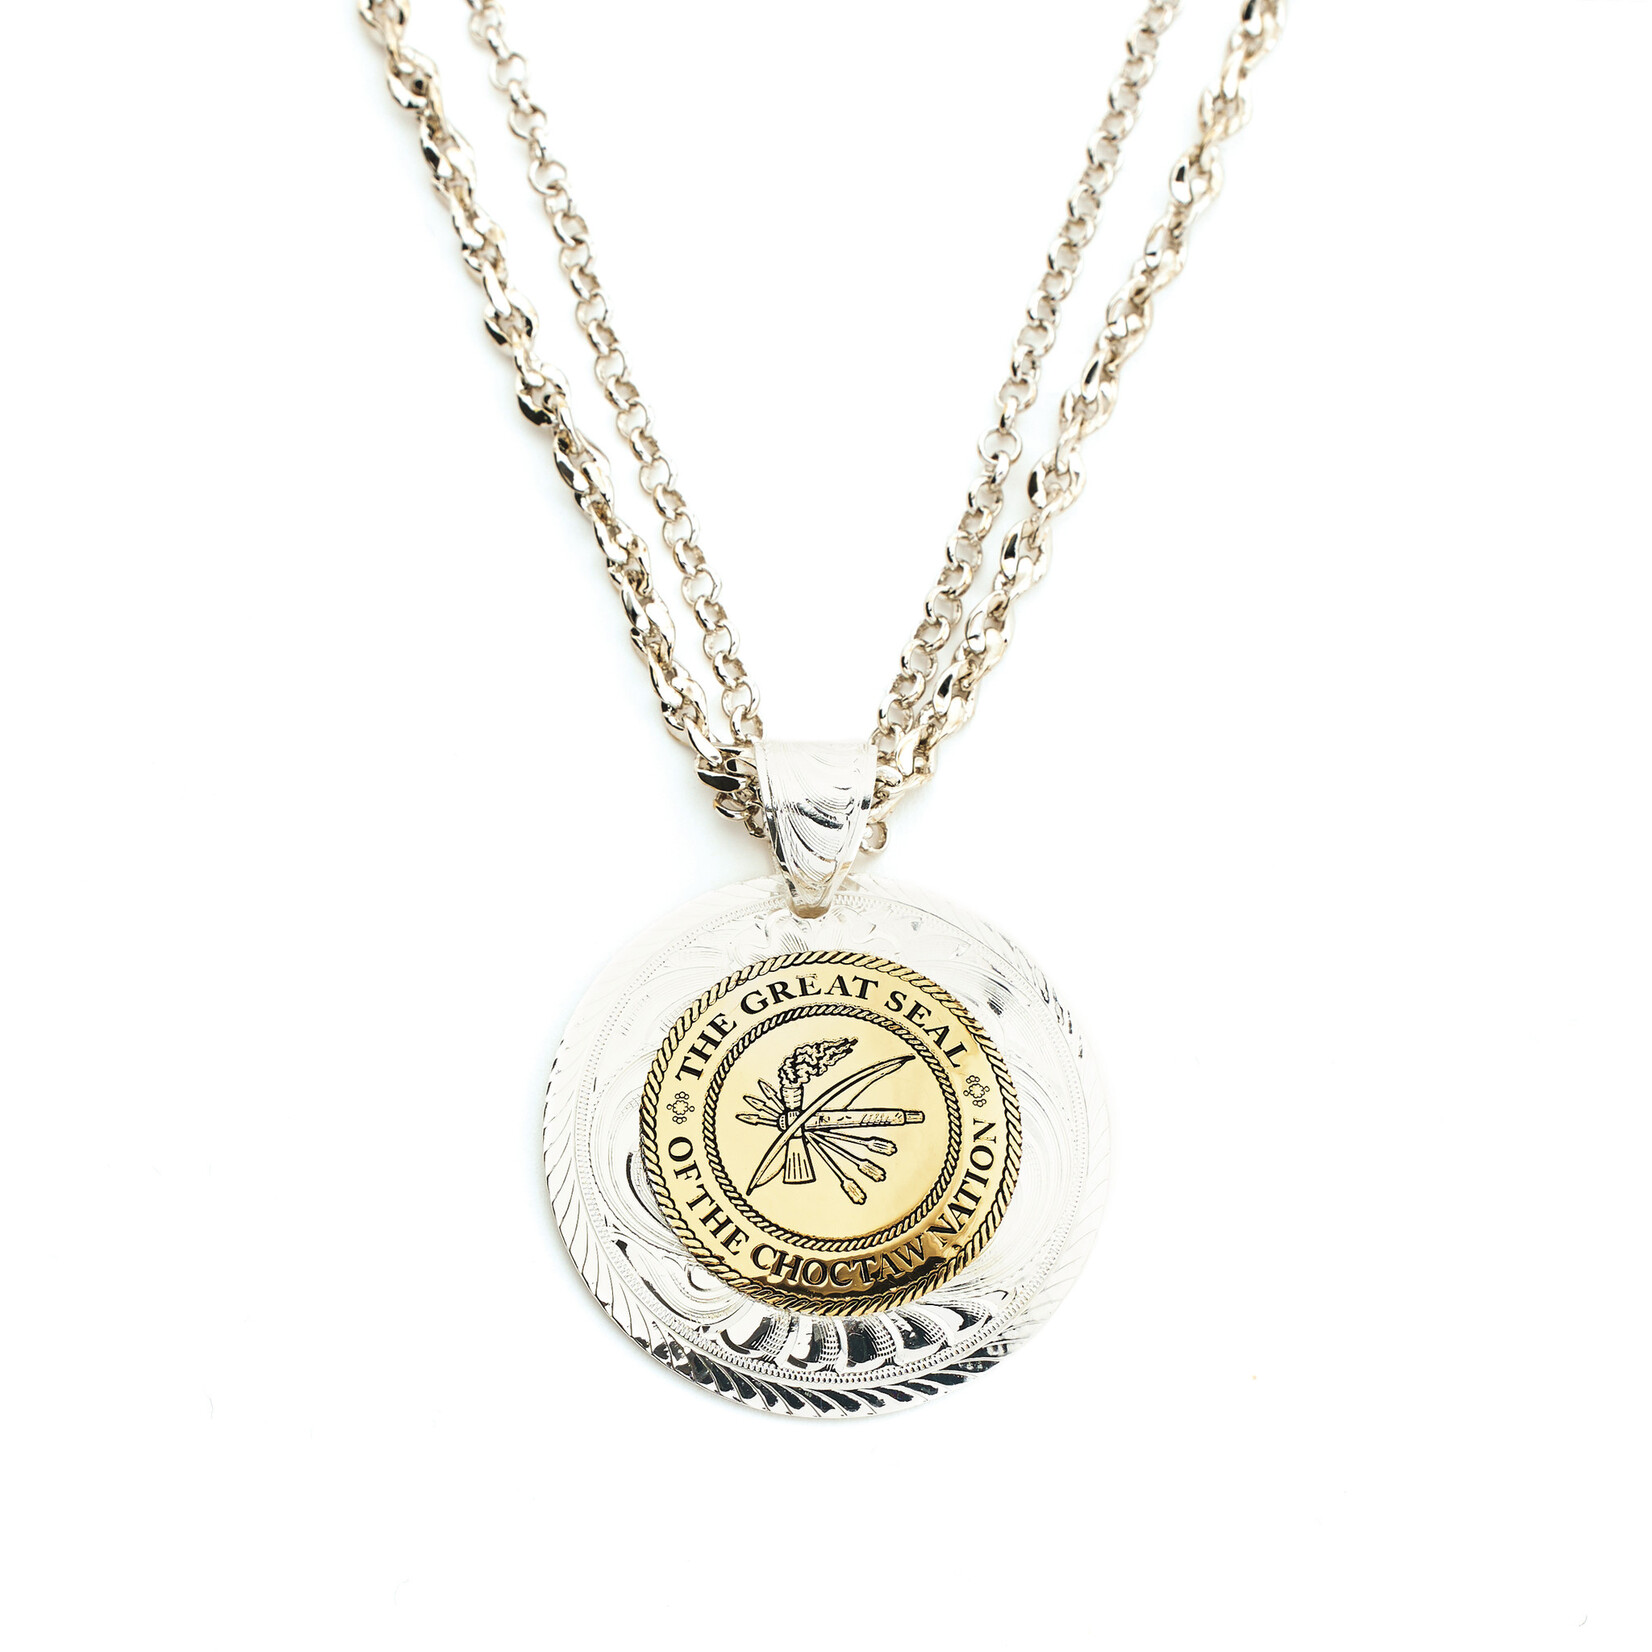 Great Seal pendent by Montana Silversmiths